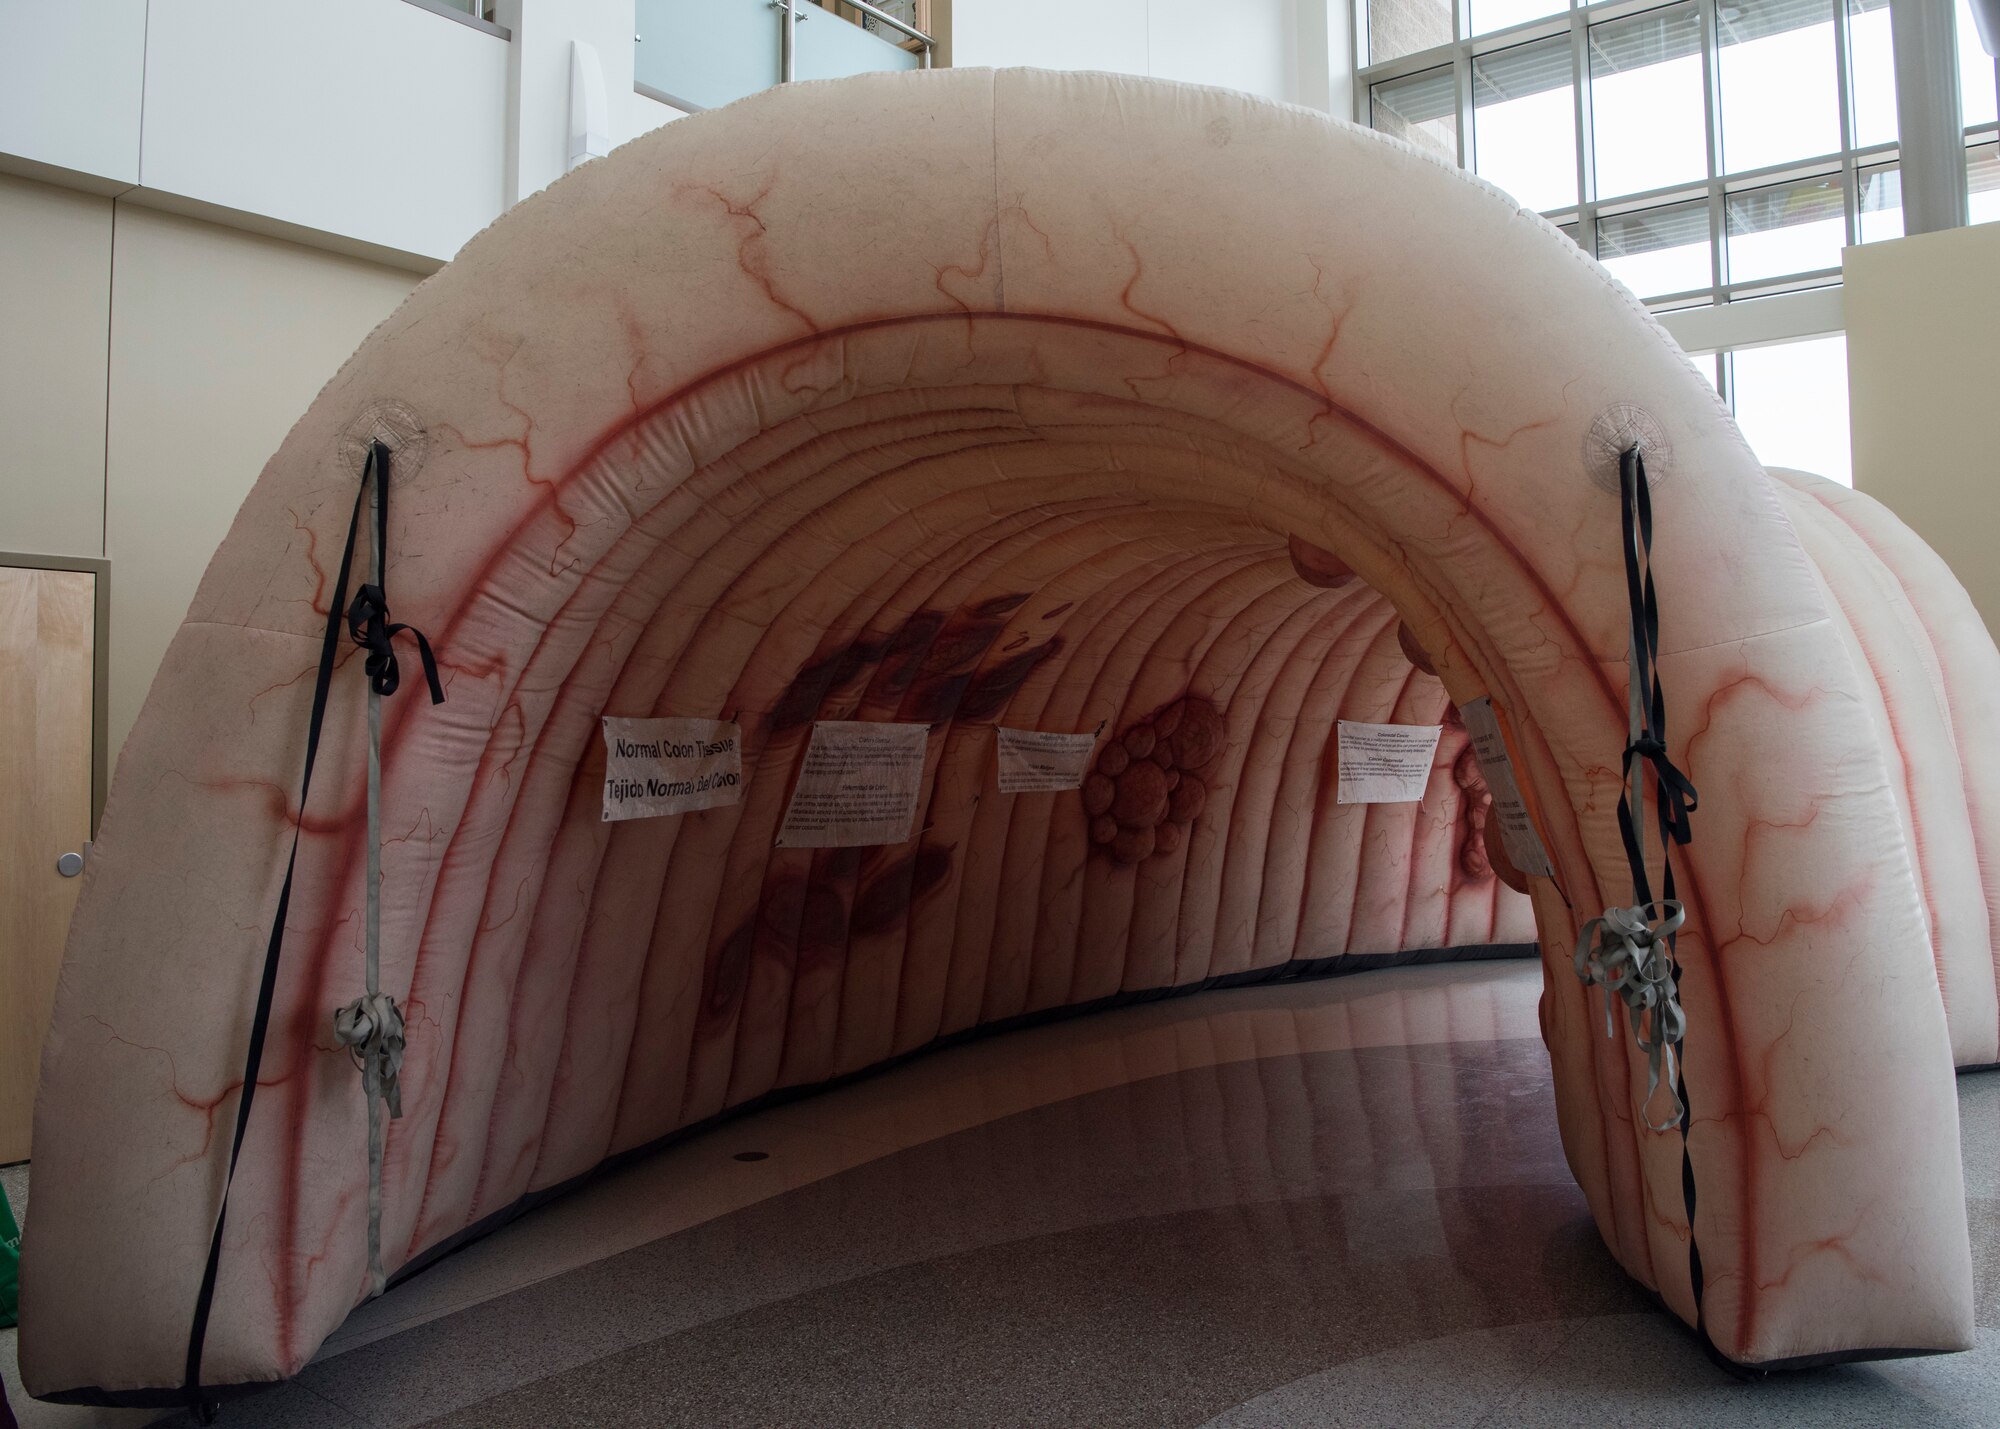 New Mexico State University’s Cancer Outreach program partners with the 49th Medical Group
to increase colorectal cancer awareness, March 7, 2019, in the medical clinic on Holloman Air
Force Base, N.M. The giant inflatable colon was brought by NMSU’s Cancer Outreach to
provide a visual representation of polyps and other cancerous lesions. (U.S. Air Force photo by
Airman 1st Class Autumn Vogt)